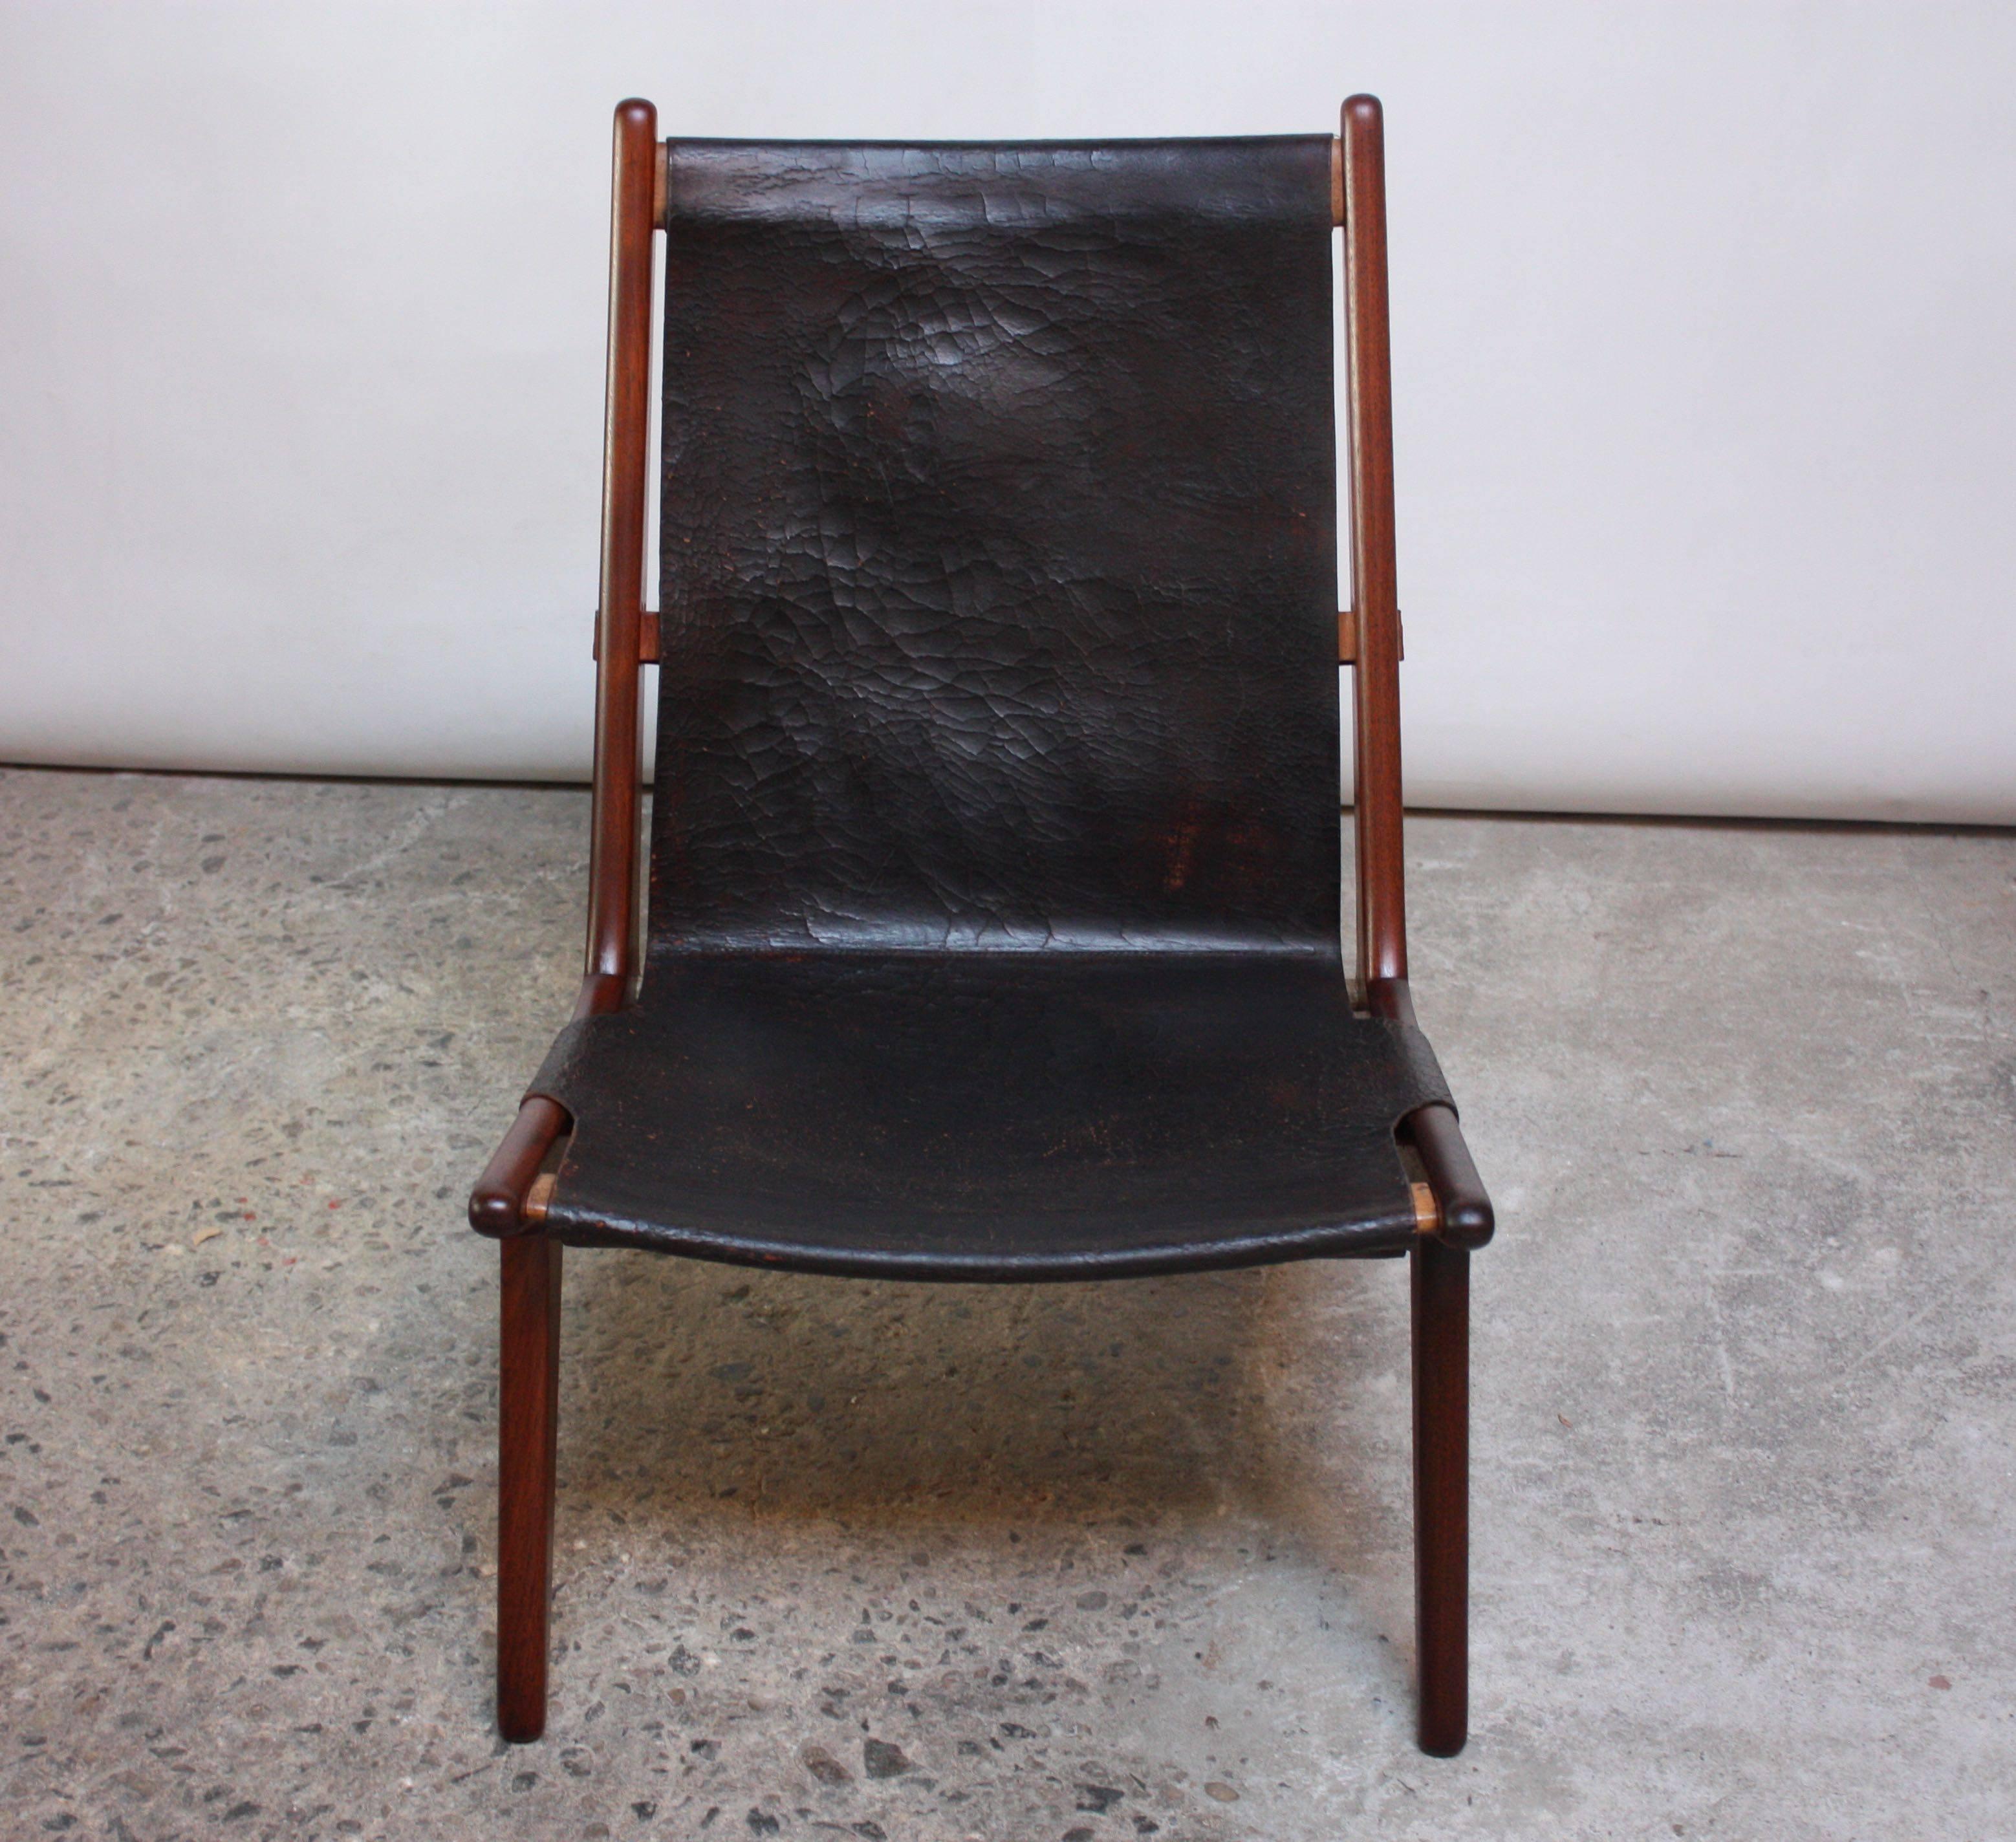 Plated Swedish Teak and Leather Hunting Chair Model #204 by Uno and Östen Kristiansson